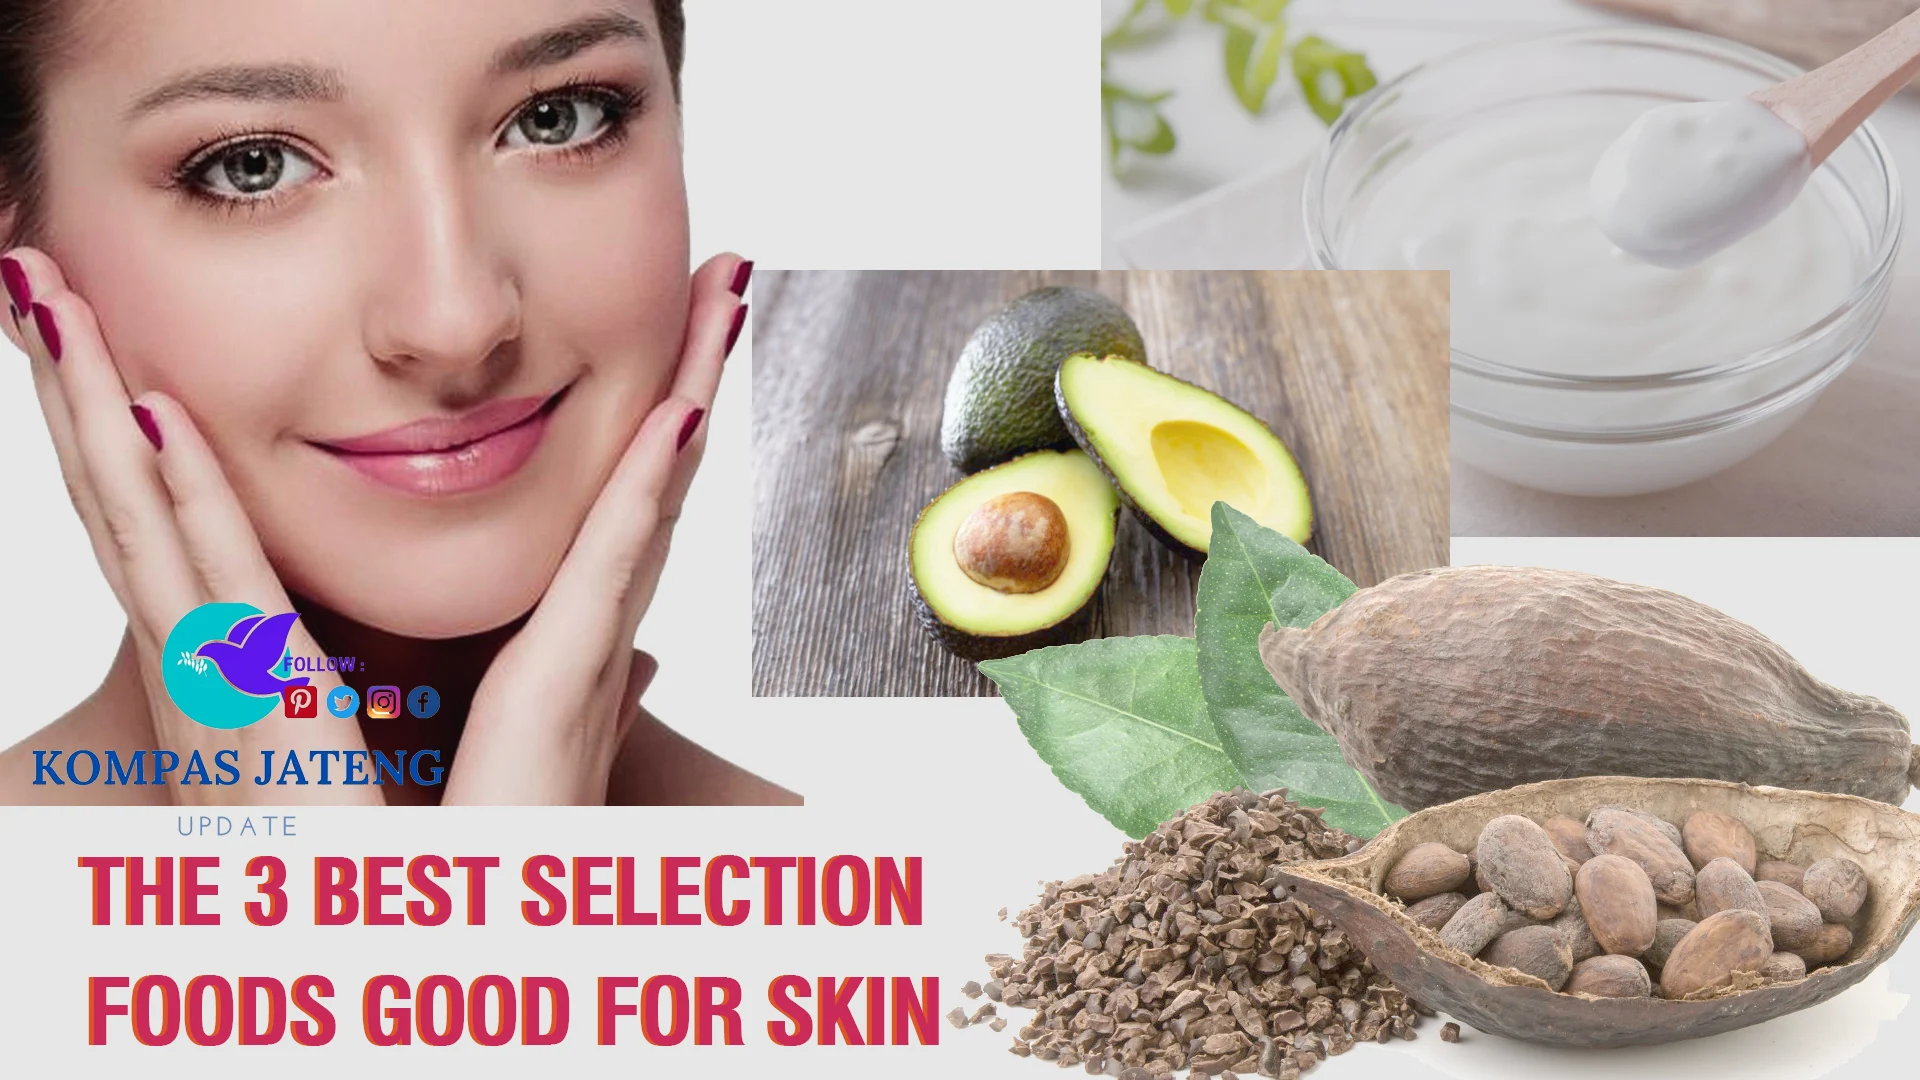 The 3 Best Selection Foods Good for Skin